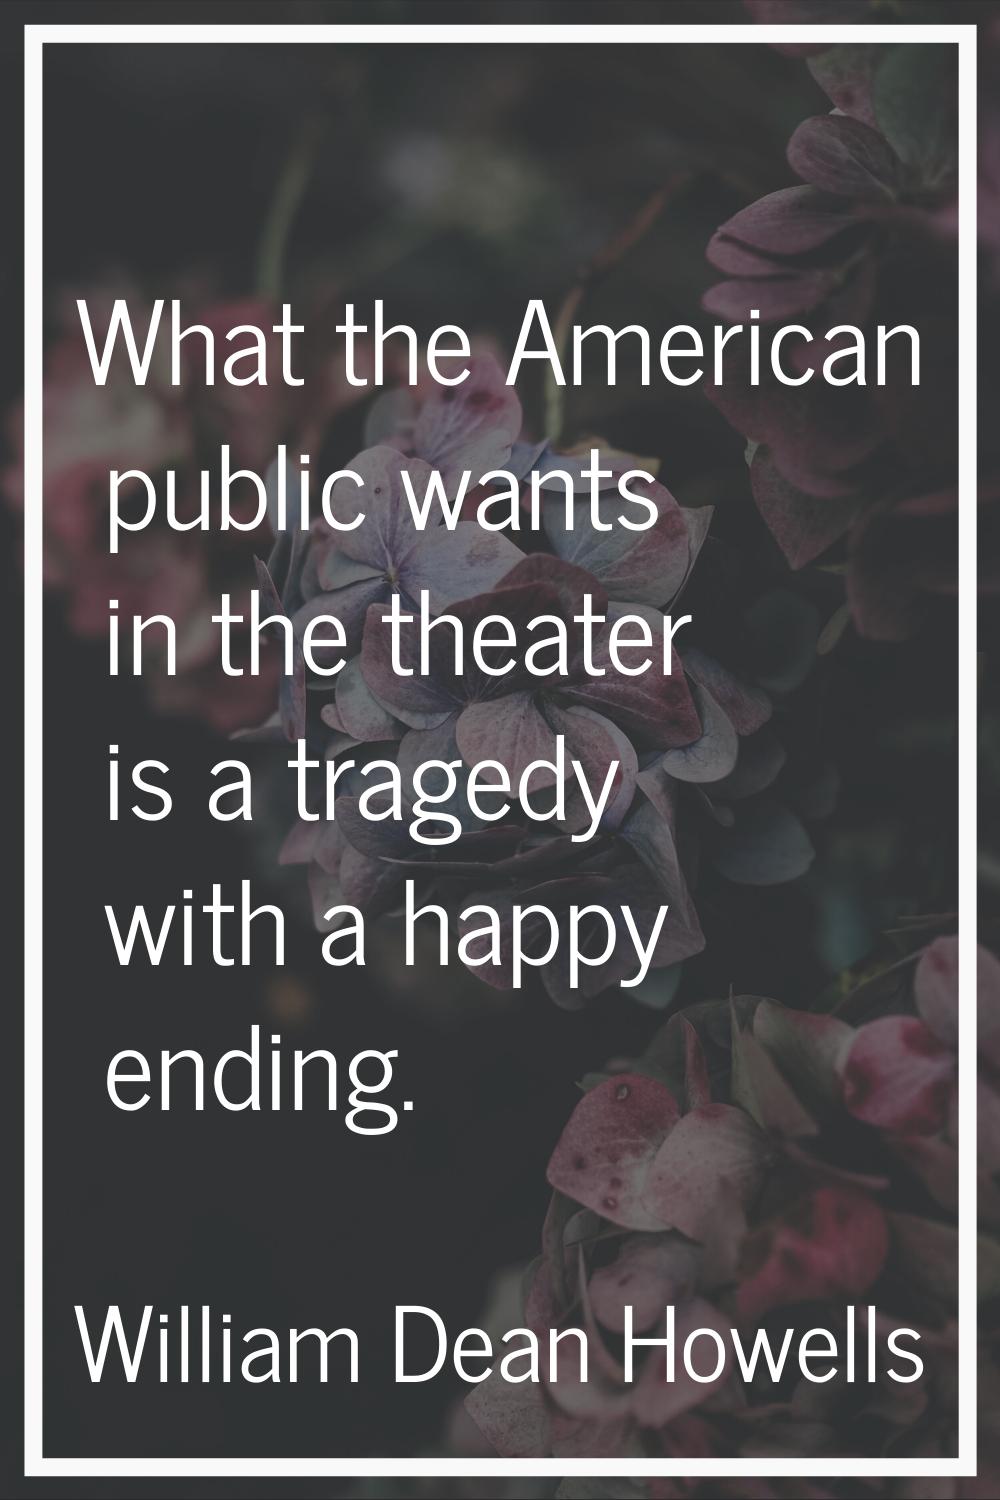 What the American public wants in the theater is a tragedy with a happy ending.